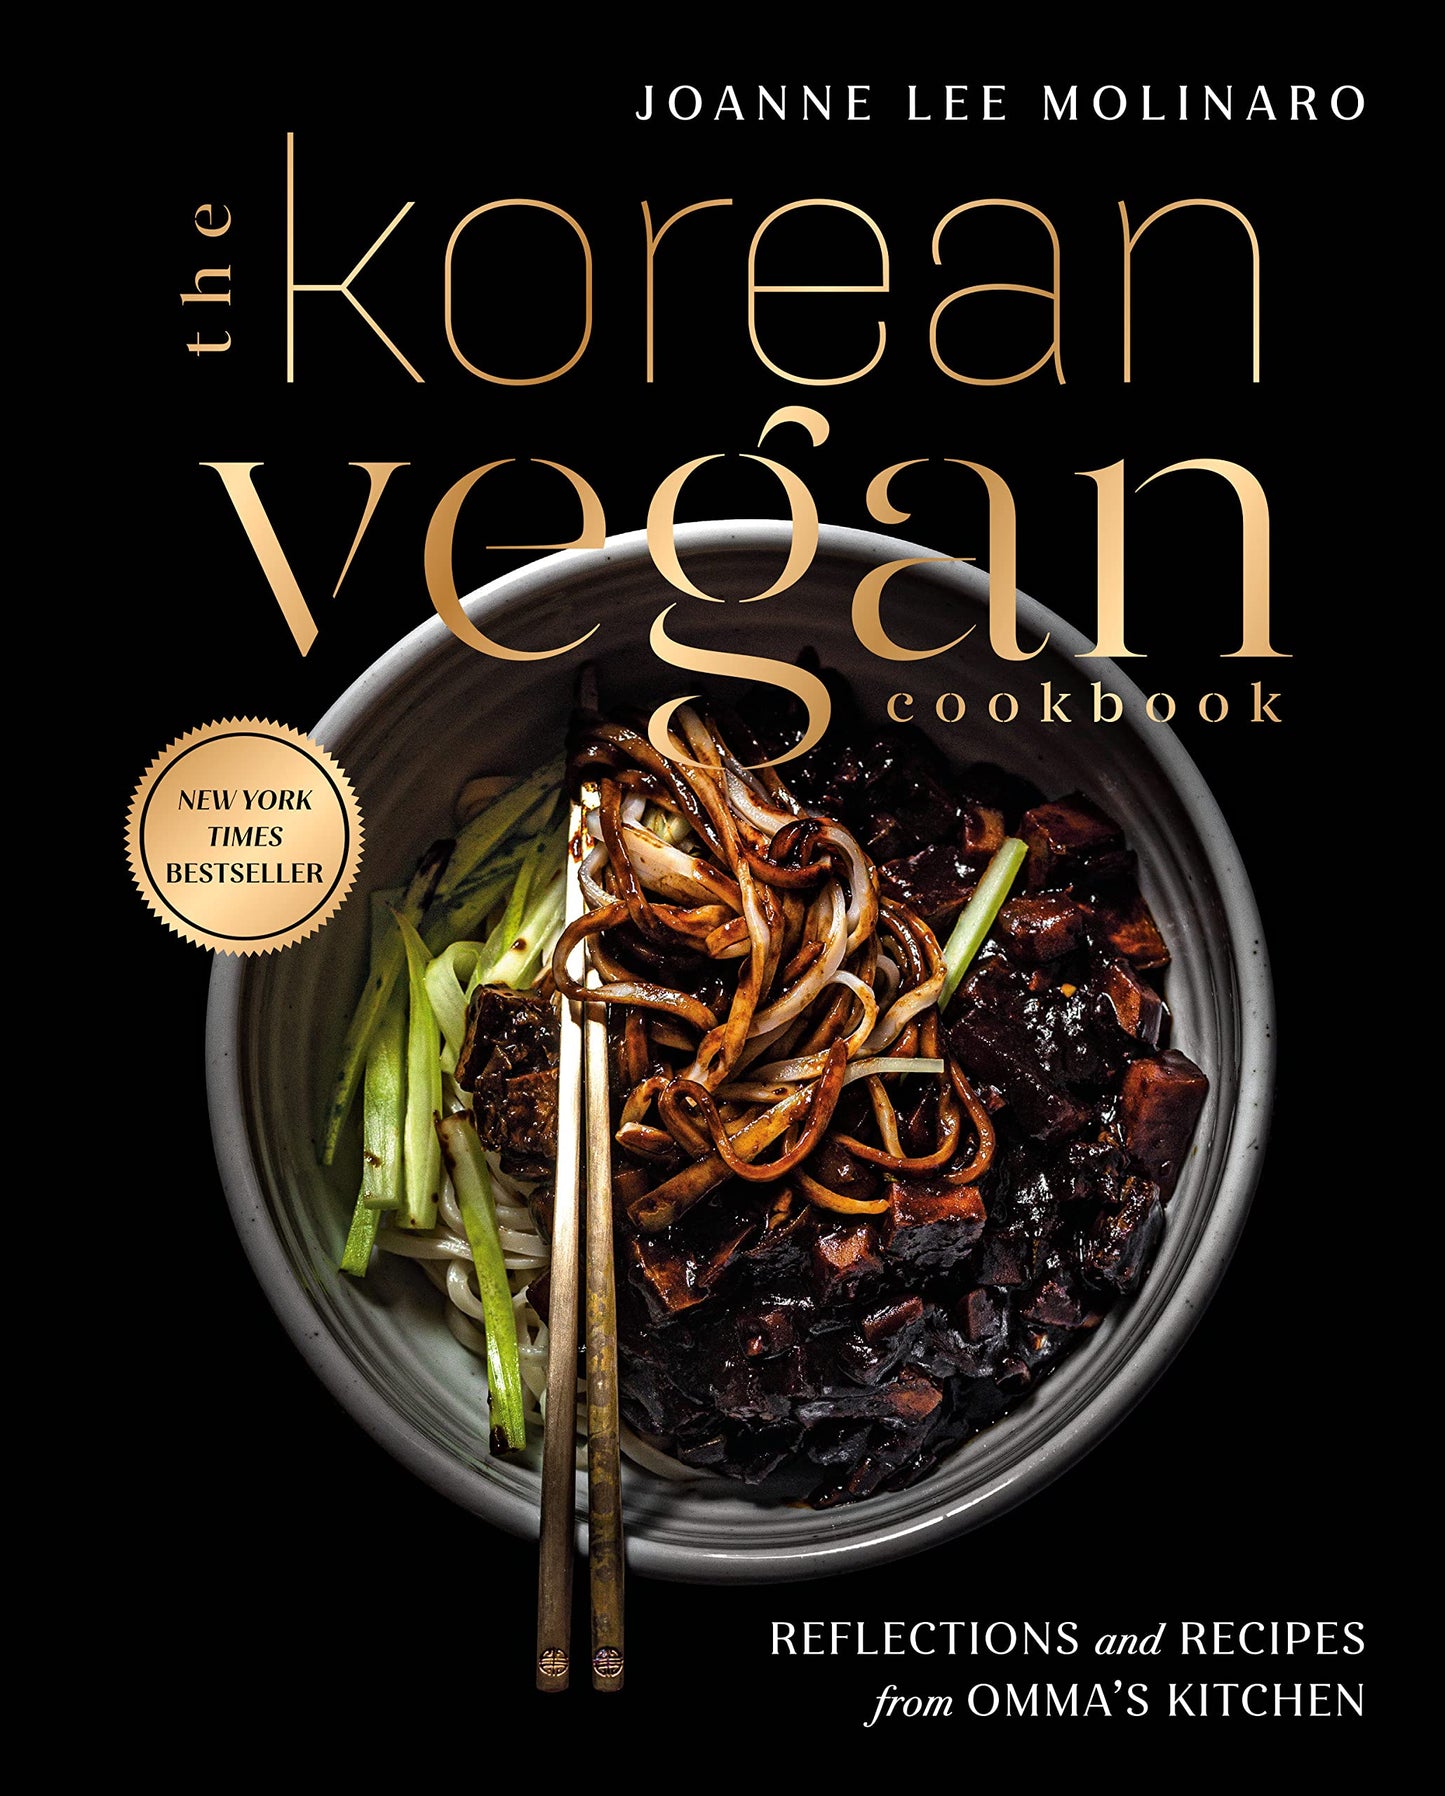 The Korean Vegan Cookbook // Reflections and Recipes from Omma's Kitchen